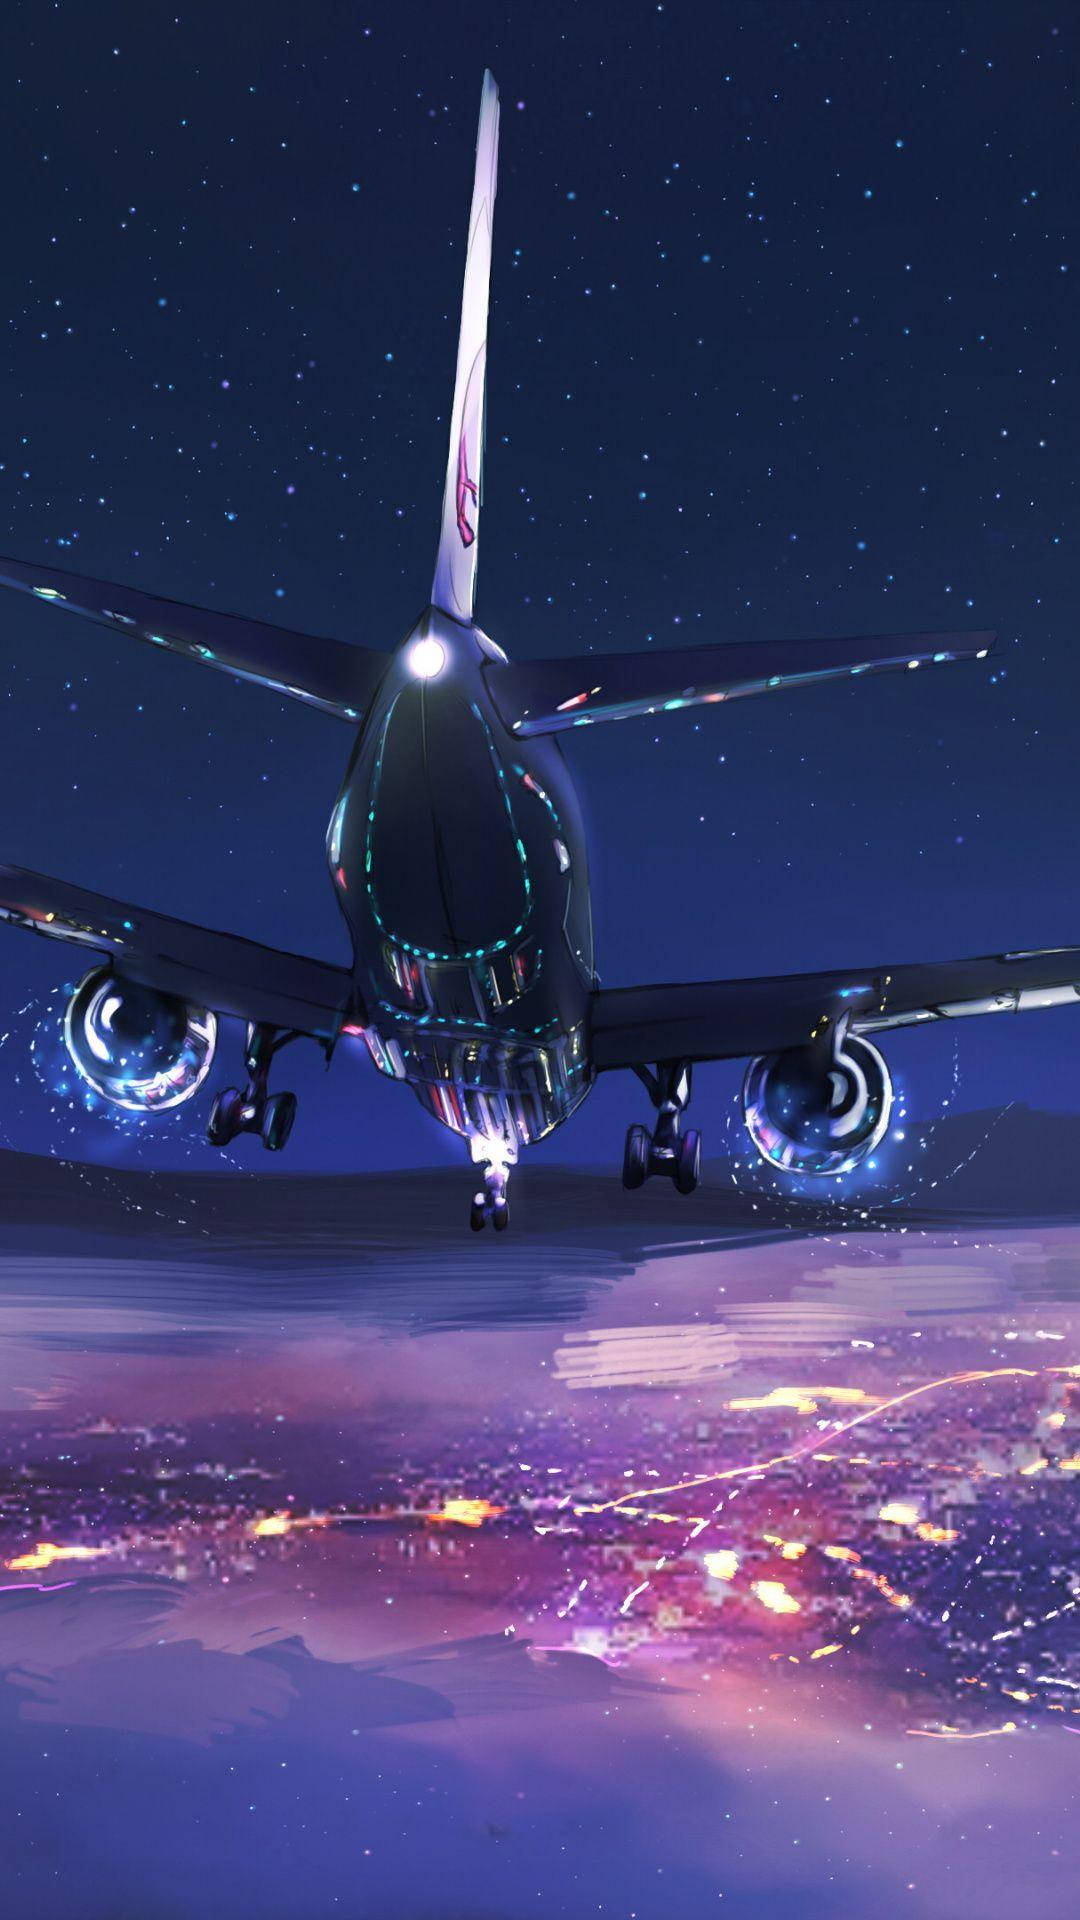 Landing Airplane Android With City Lights Wallpaper